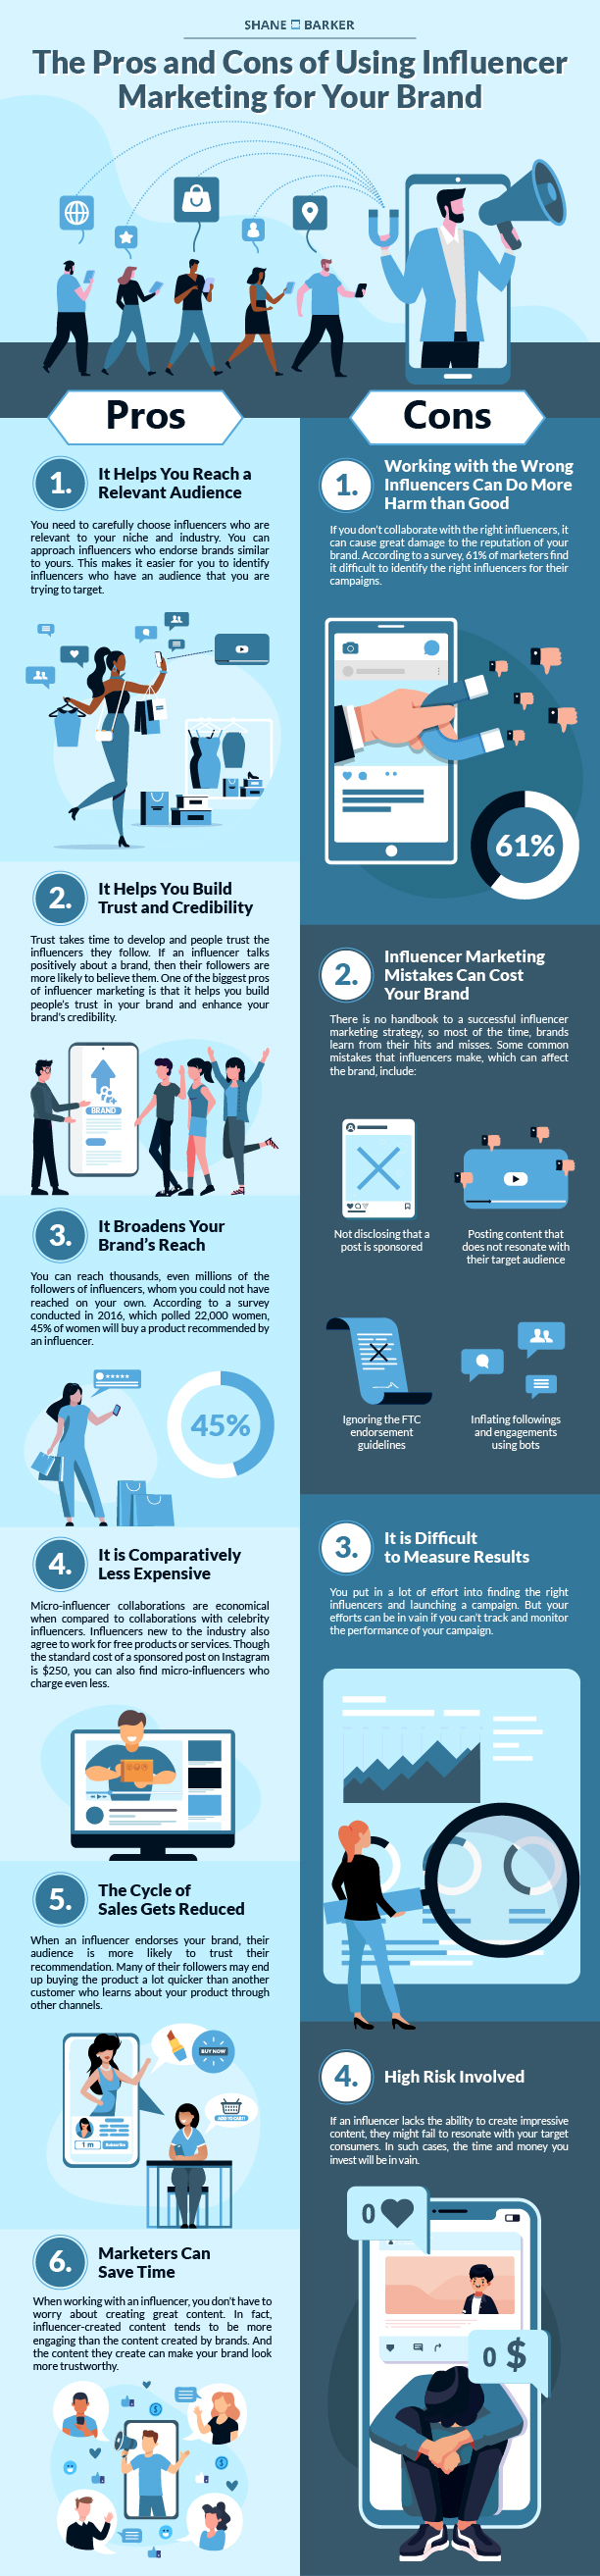 The Pros and Cons of Influencer Marketing for Your Brand Infographic